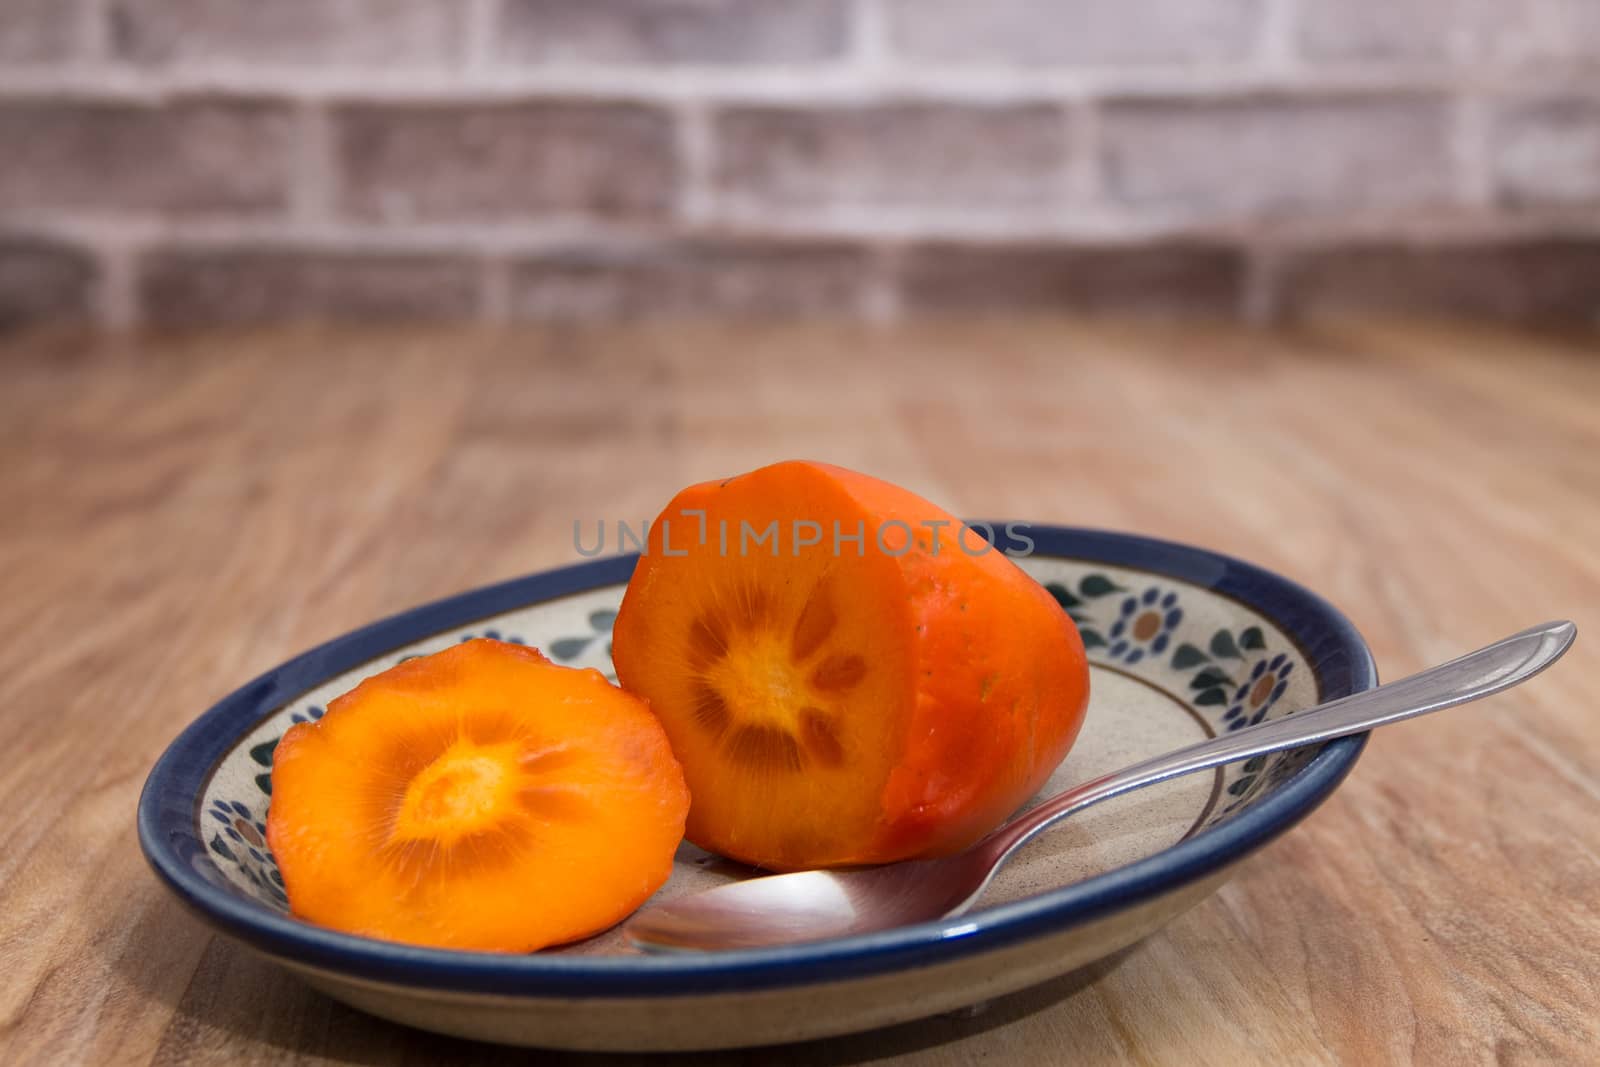 persimmon cut ready to eat, on rustic plate over wooden table with bricks background